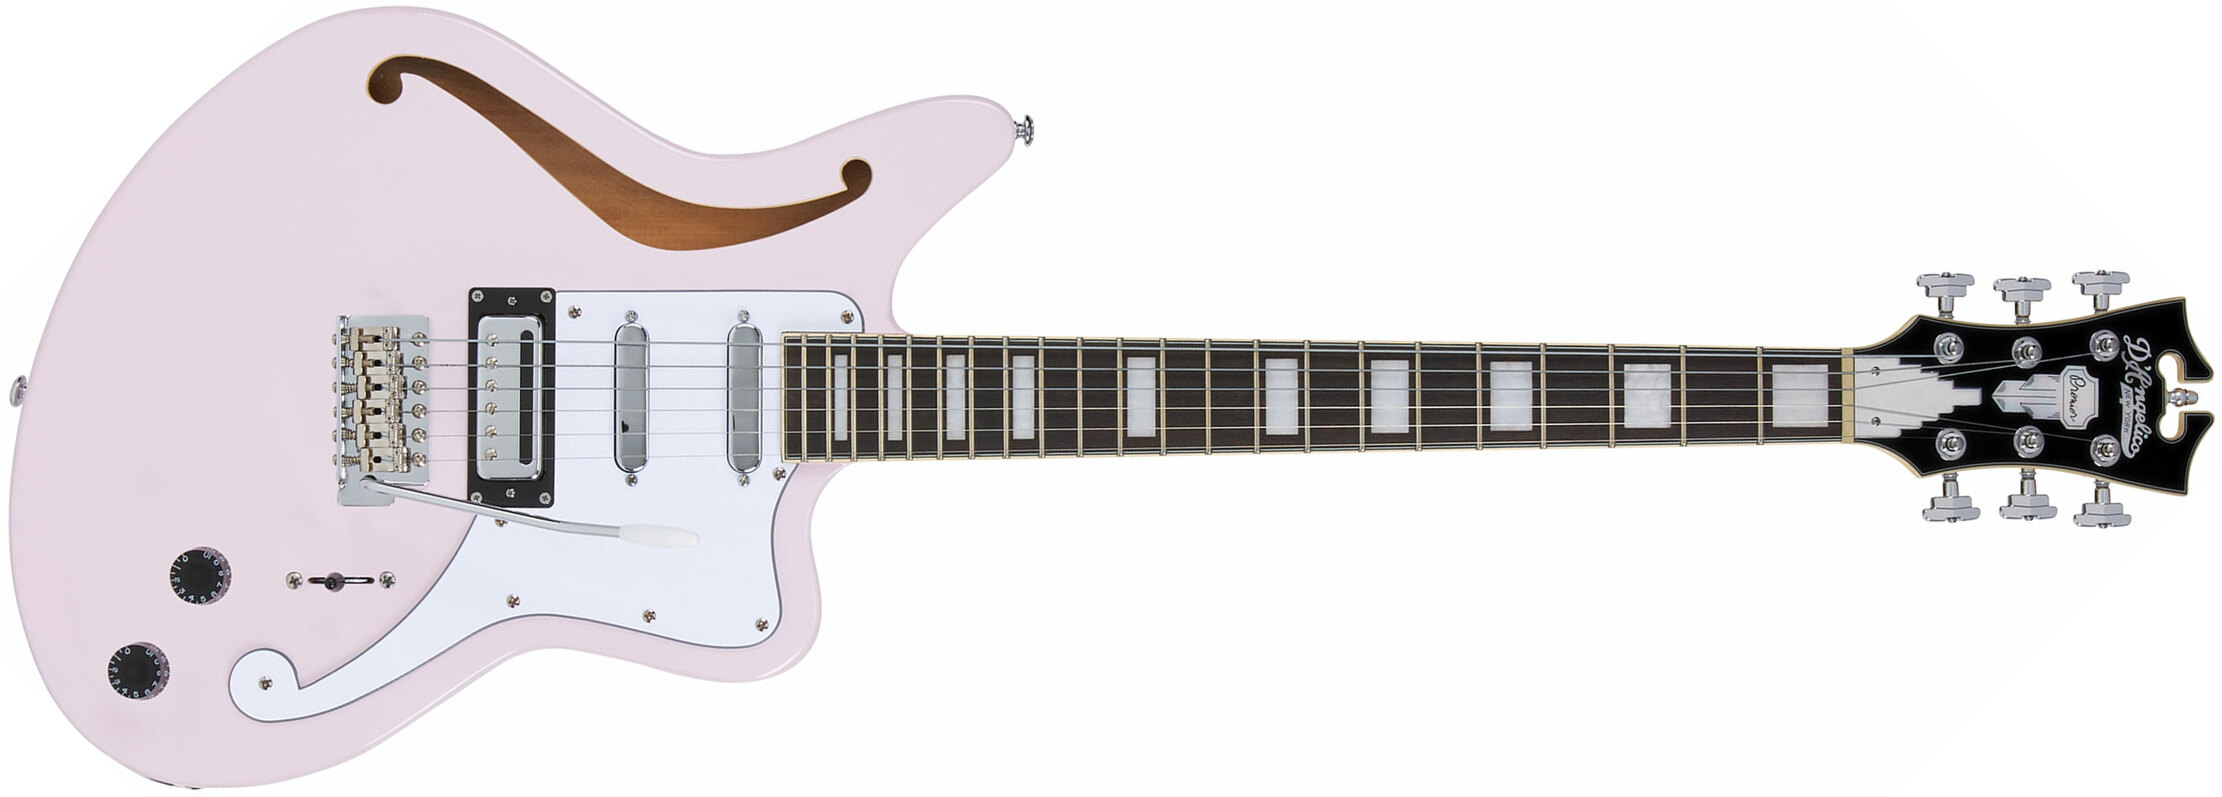 D'angelico Bedford Sh Premier Hss Trem Ova - Shell Pink - Semi-hollow electric guitar - Main picture